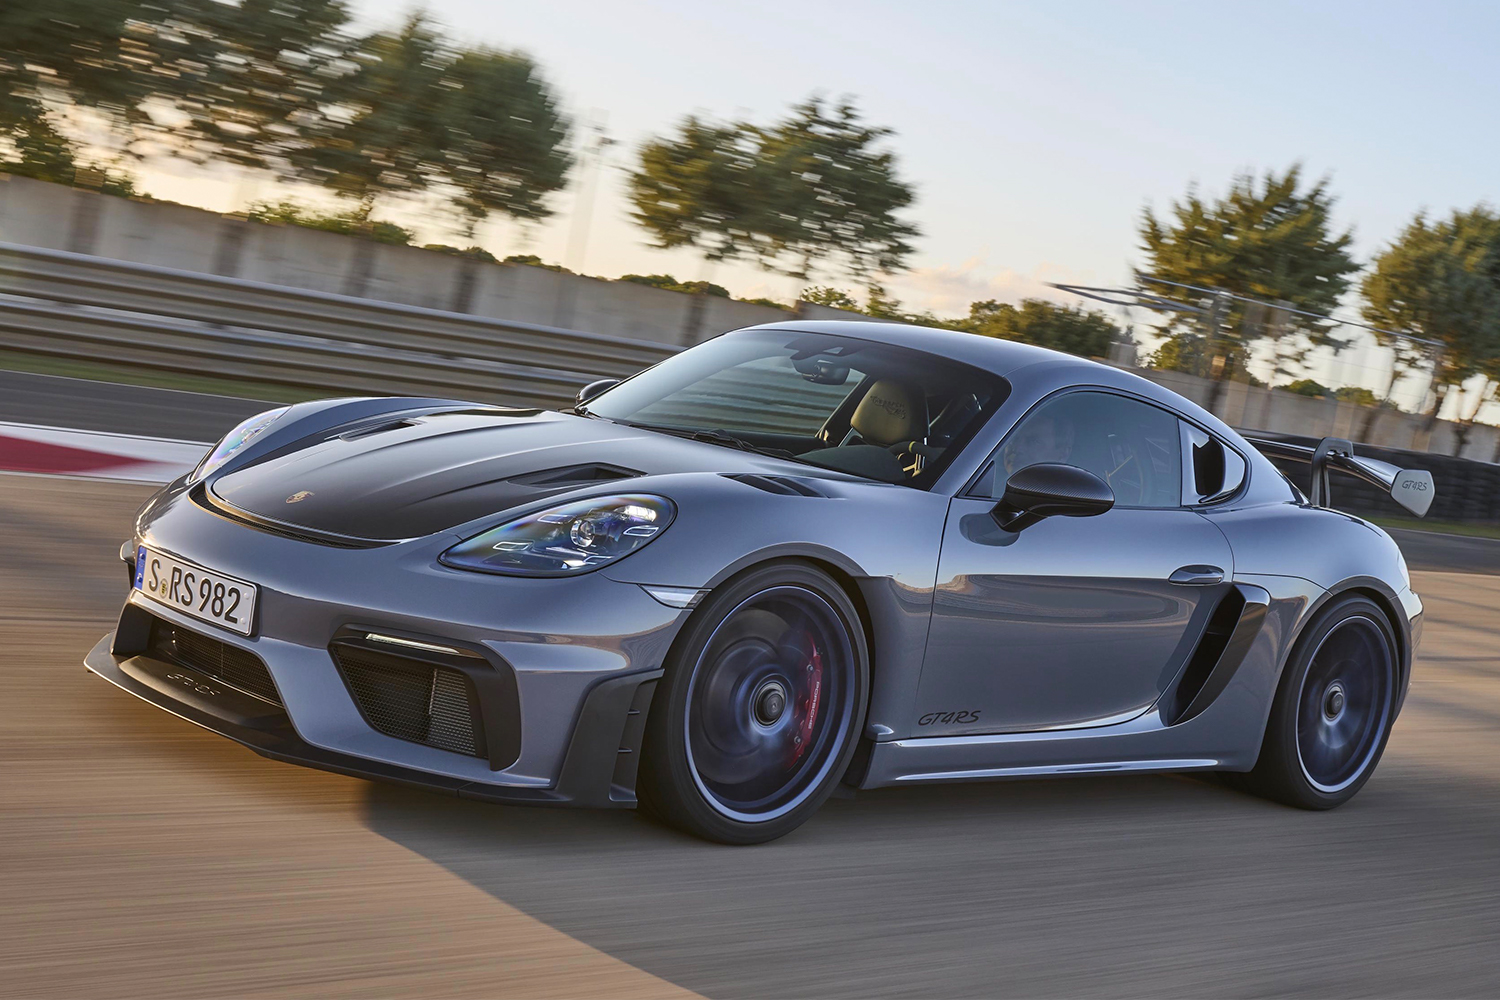 The new Porsche 718 Cayman GT4 RS racing down a track